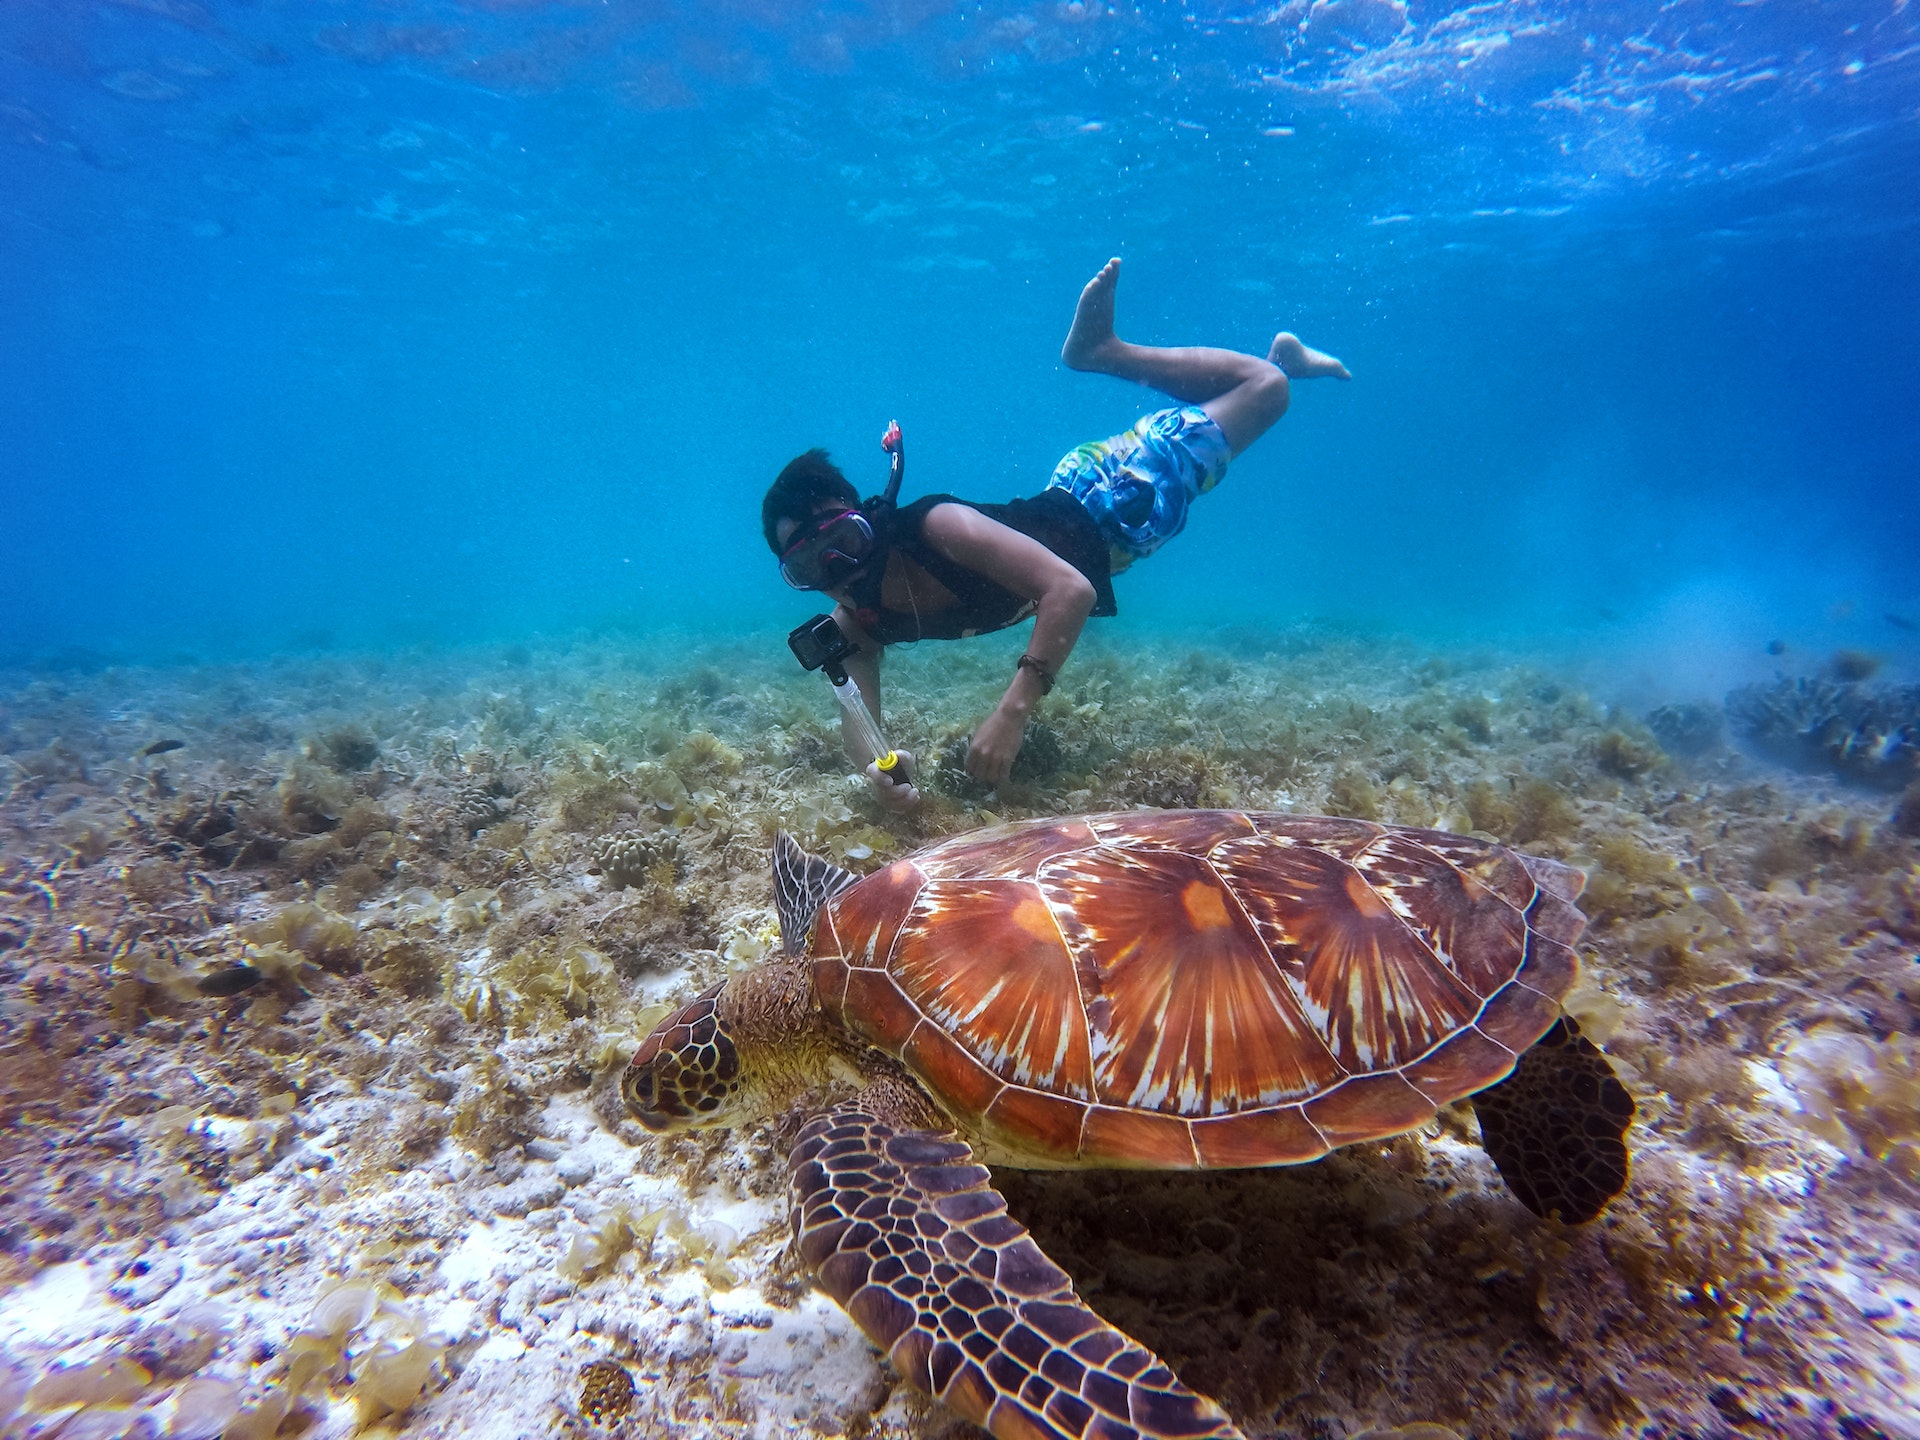 Snorkeling And Diving In The Great Barrier Reef - Exploring The Underwater World